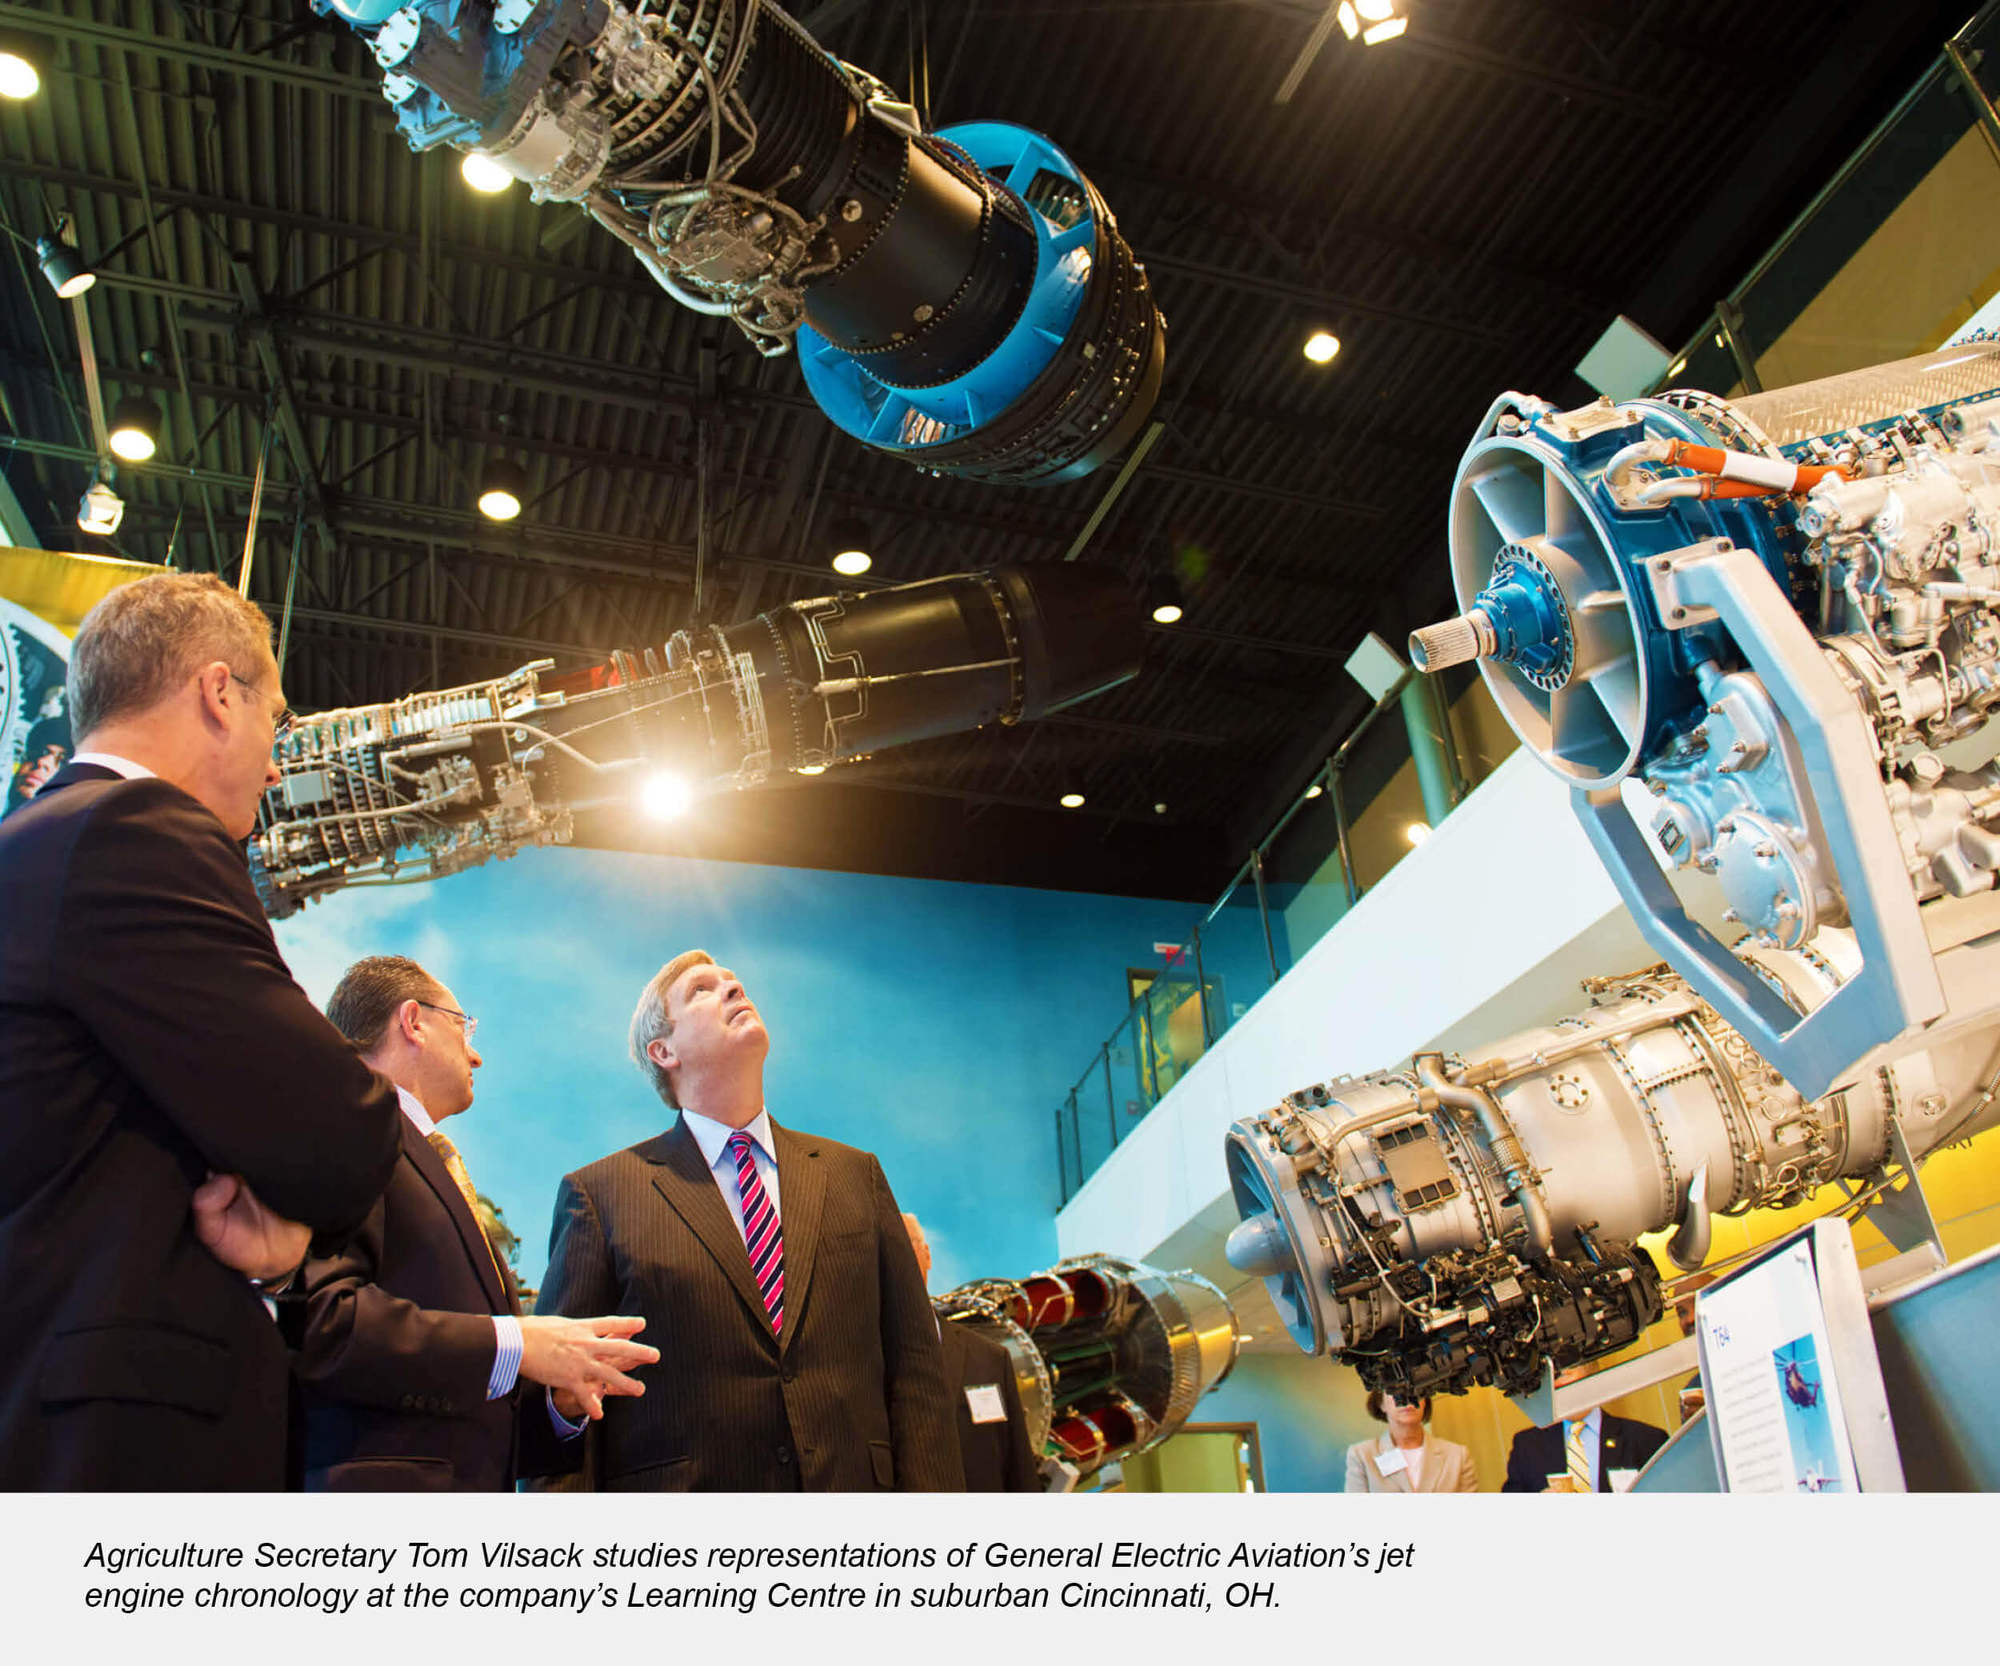 Agriculture Secretary Tom Vilsack studies representations of General Electric Aviation’s jet engine chronology at the company’s Learning Centre in sub